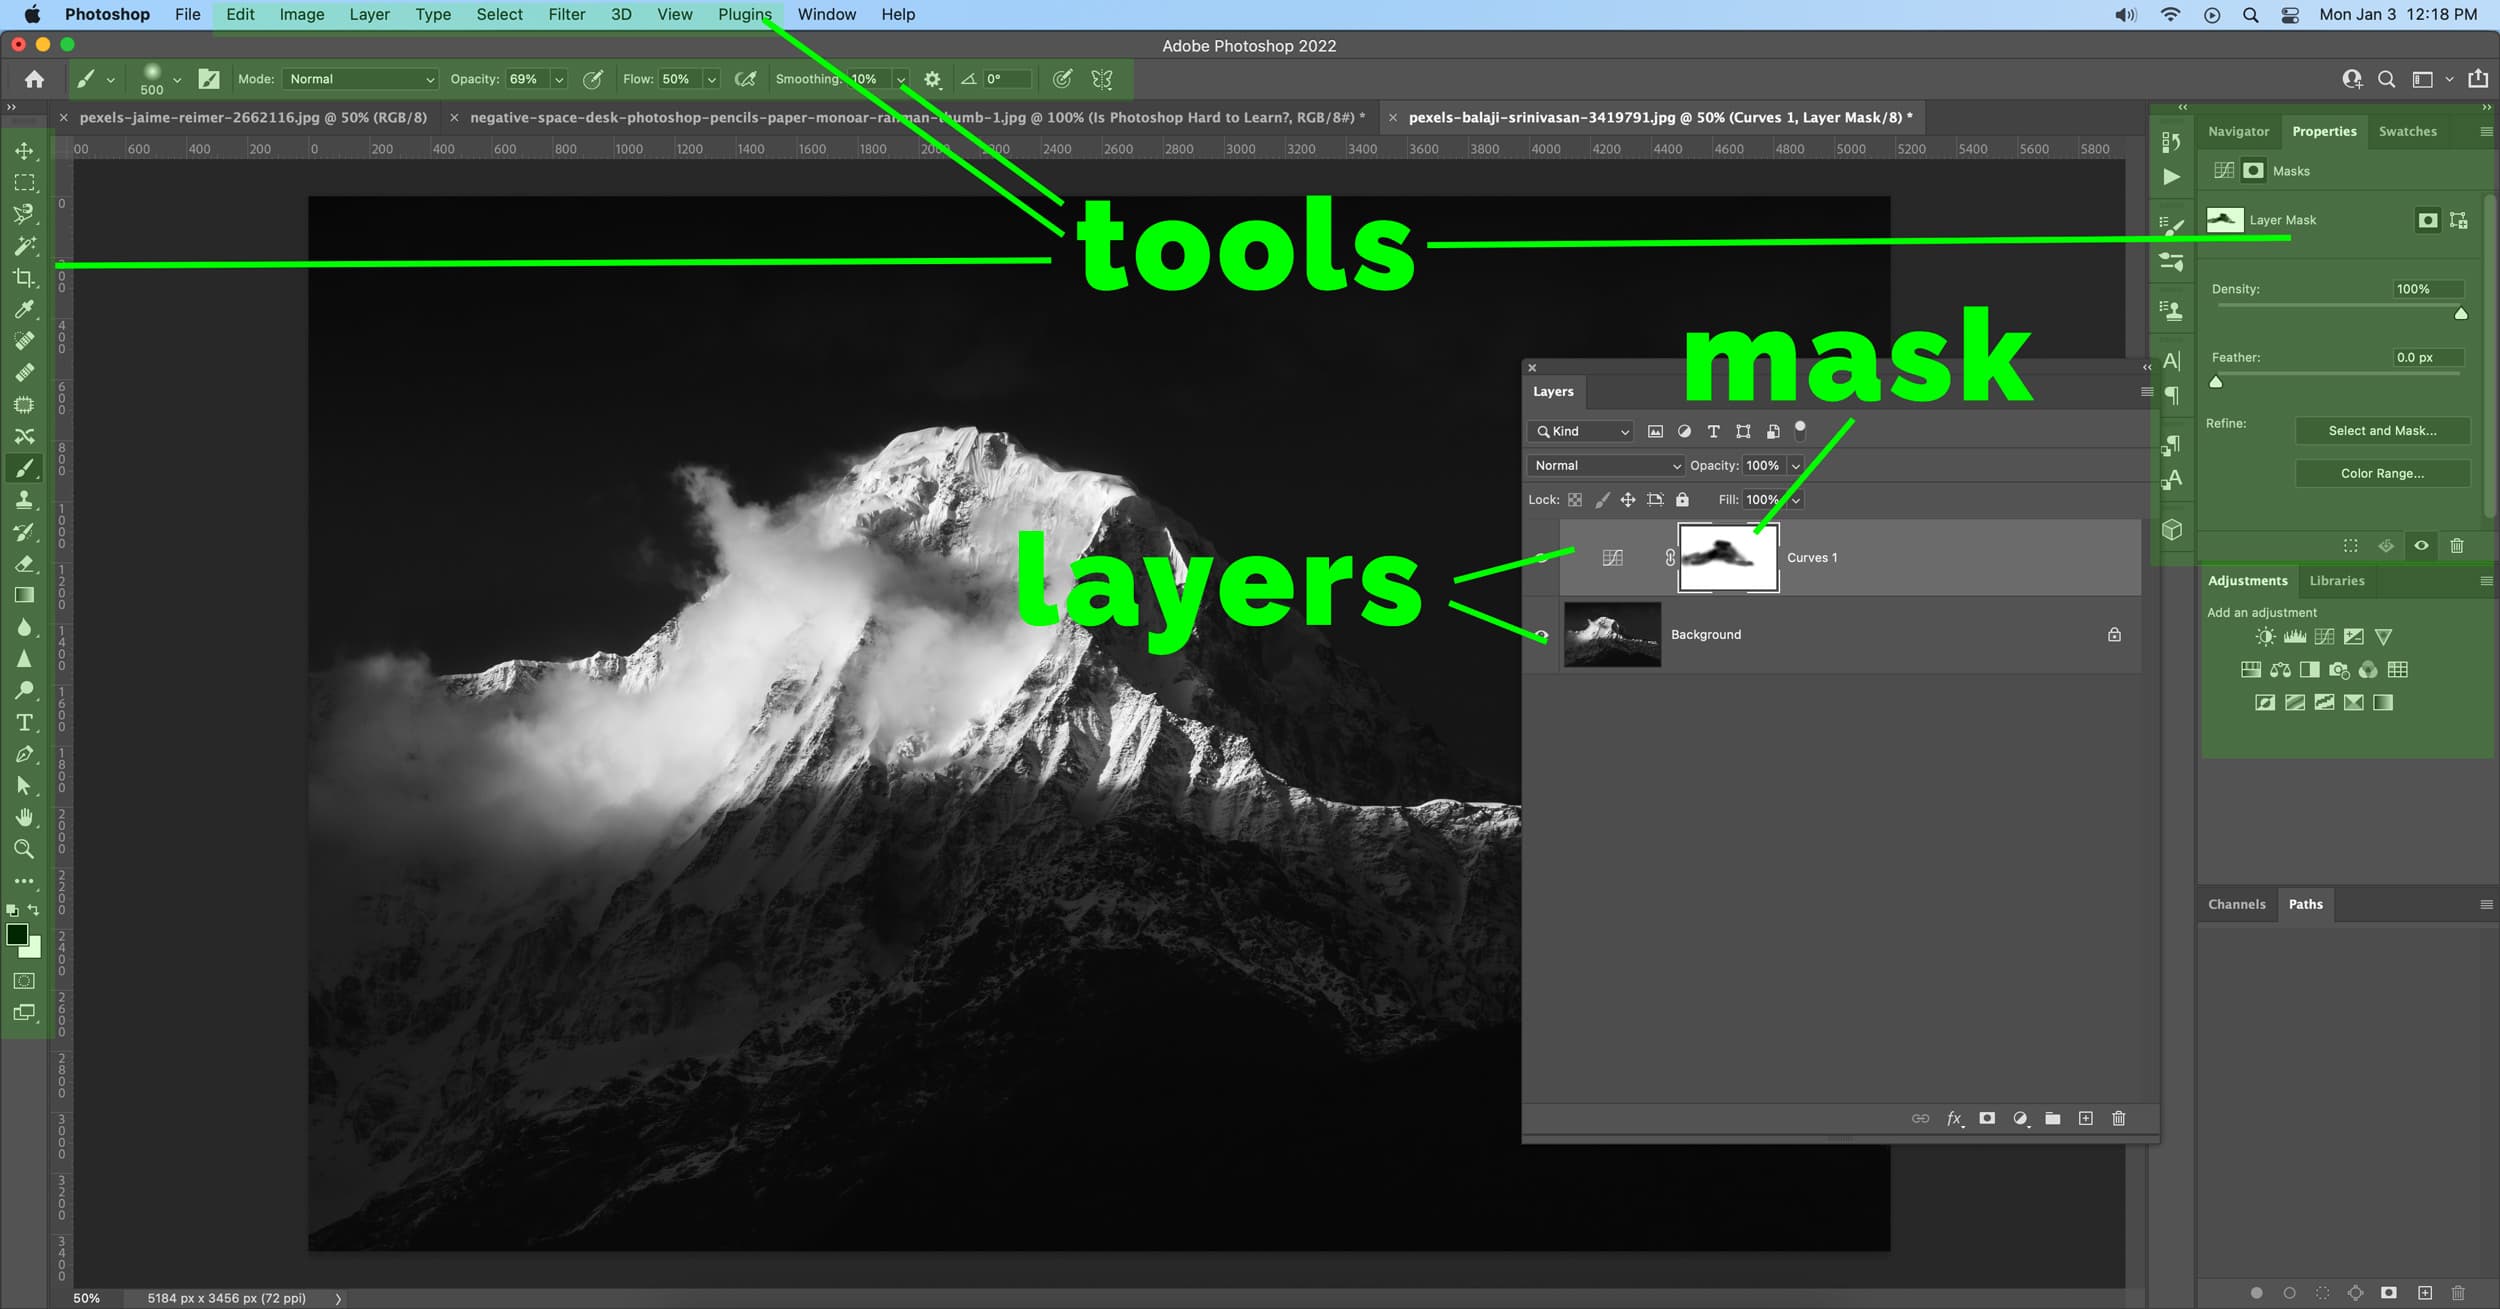 Screenshot showing why Photoshop is difficult to learn: tools, layers, mask.